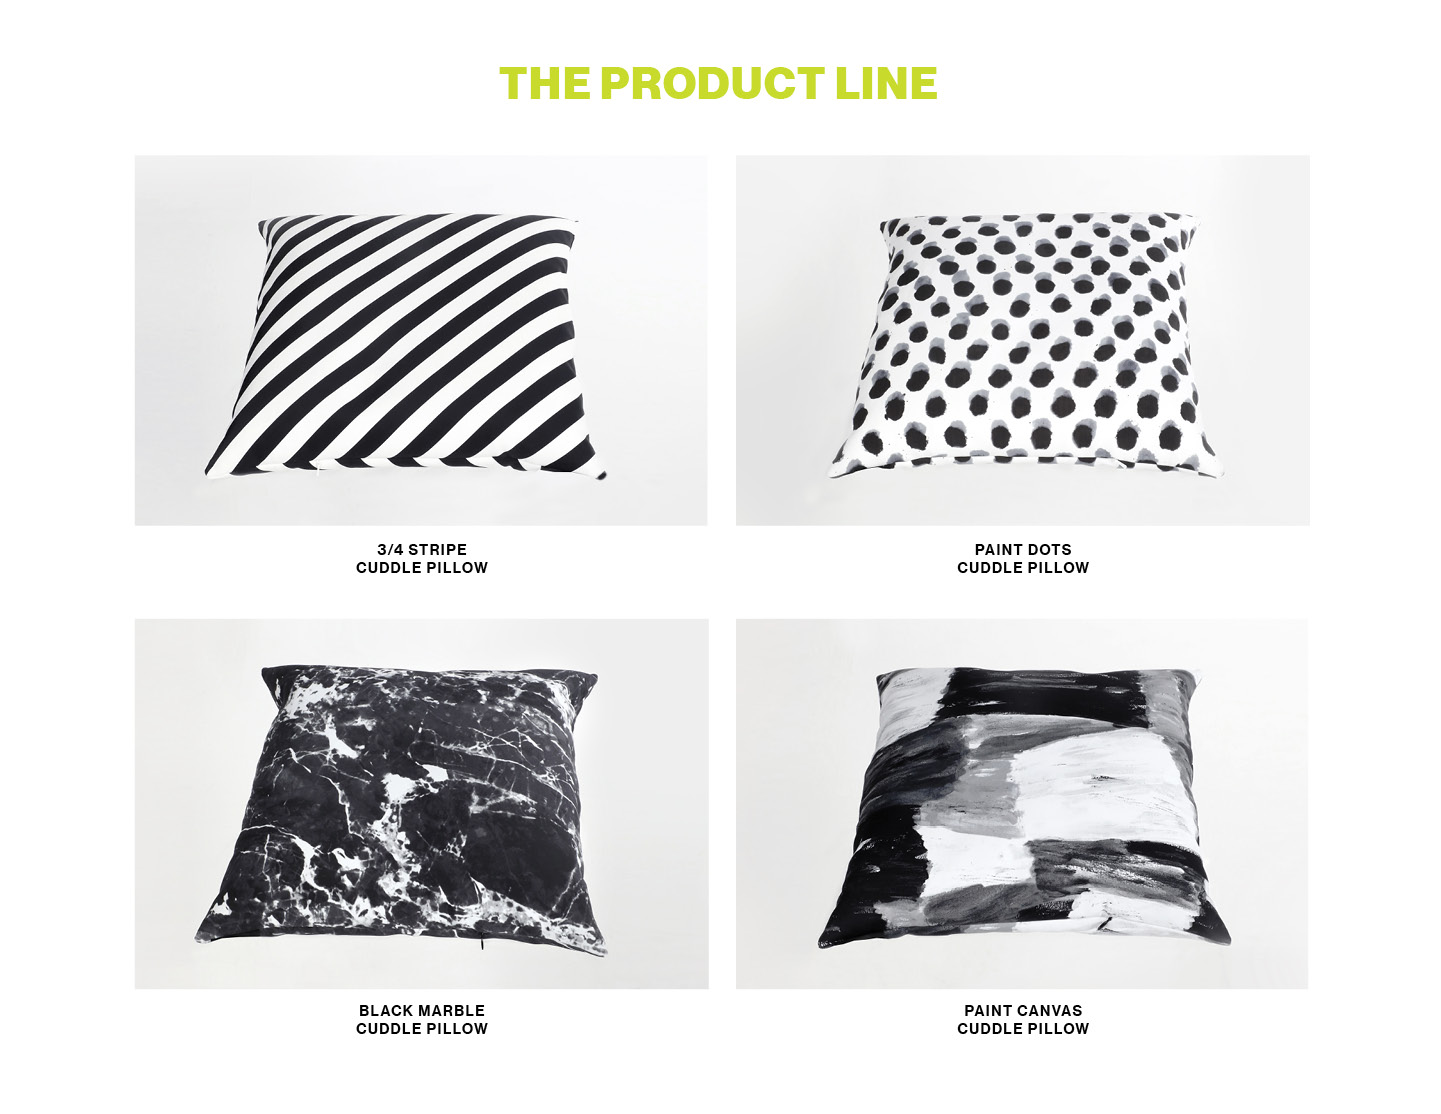 The Cuddle Pillow product line